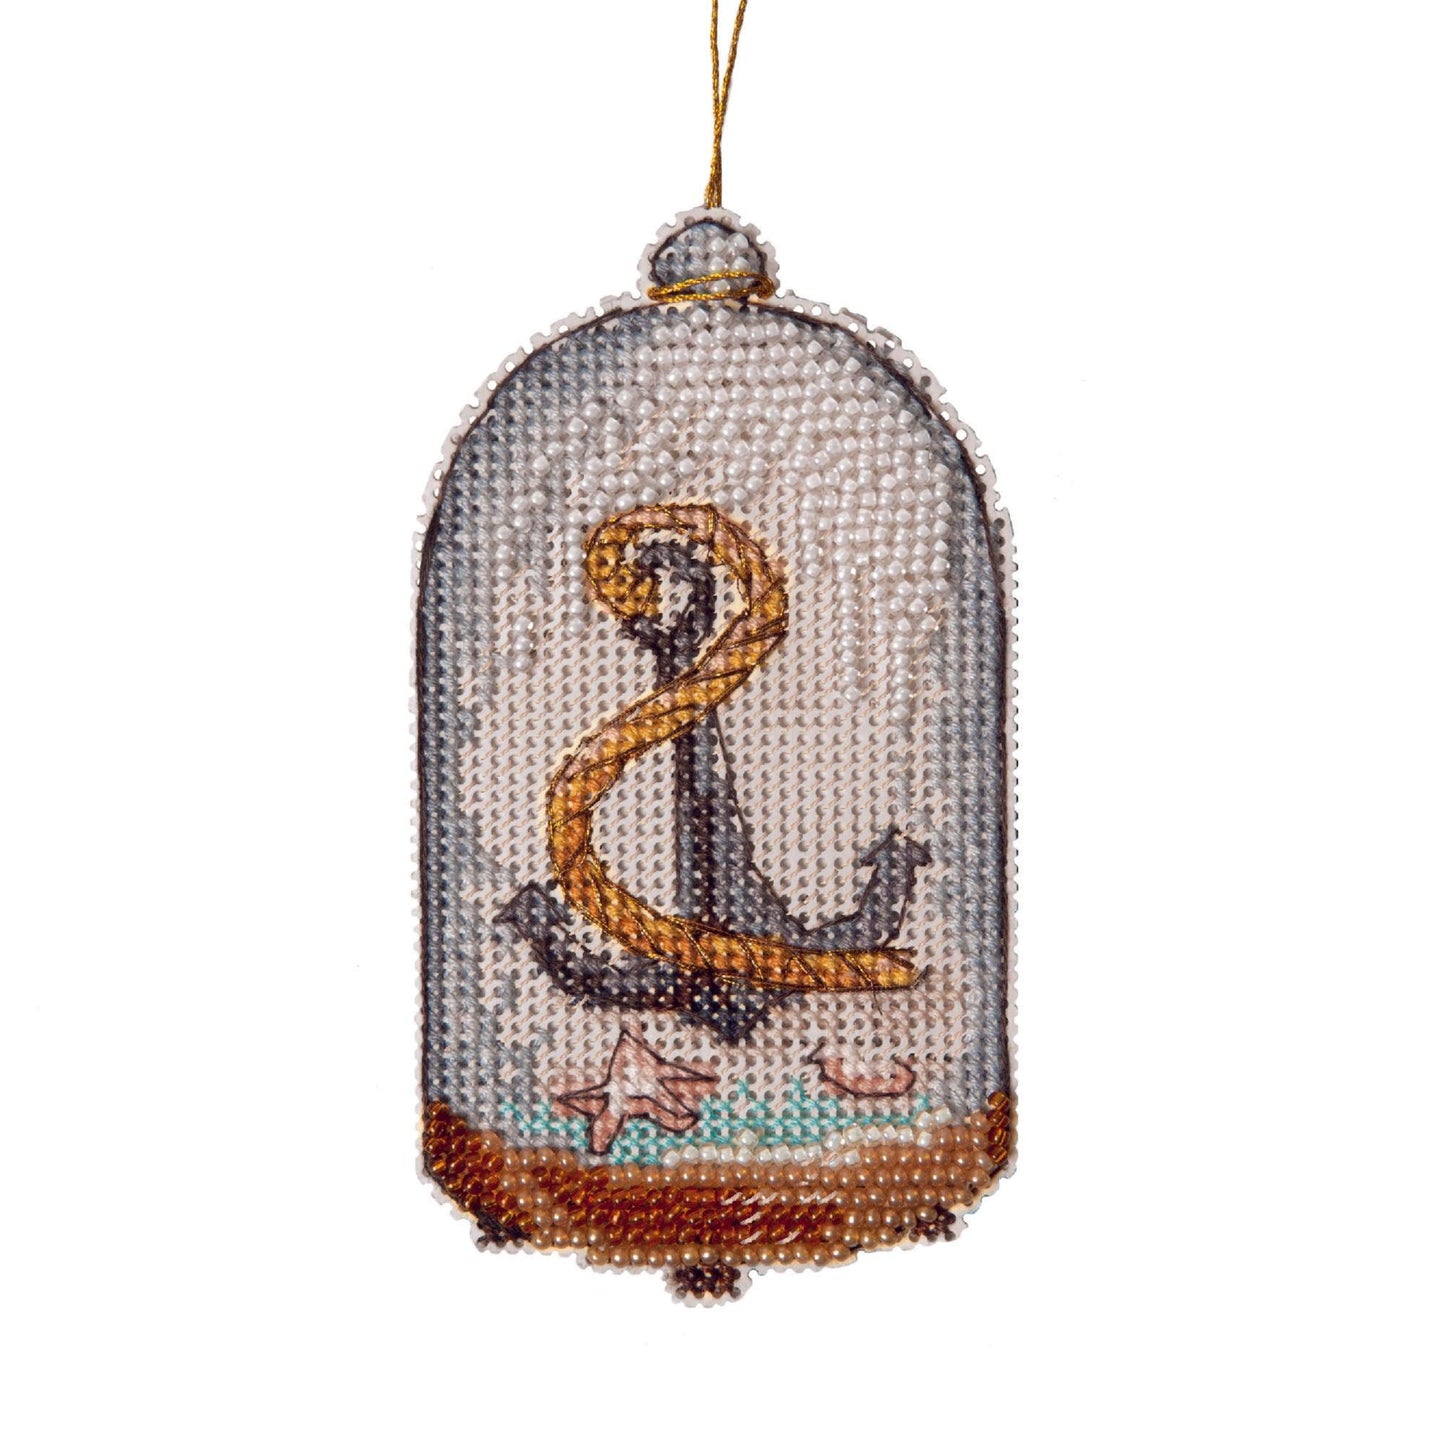 ANCHOR "In search of treasures series", Counted Cross Stitch Kit, 14 count plastic canvas, size 6,5 x 11 cm, CRYSTAL ART (T-88)